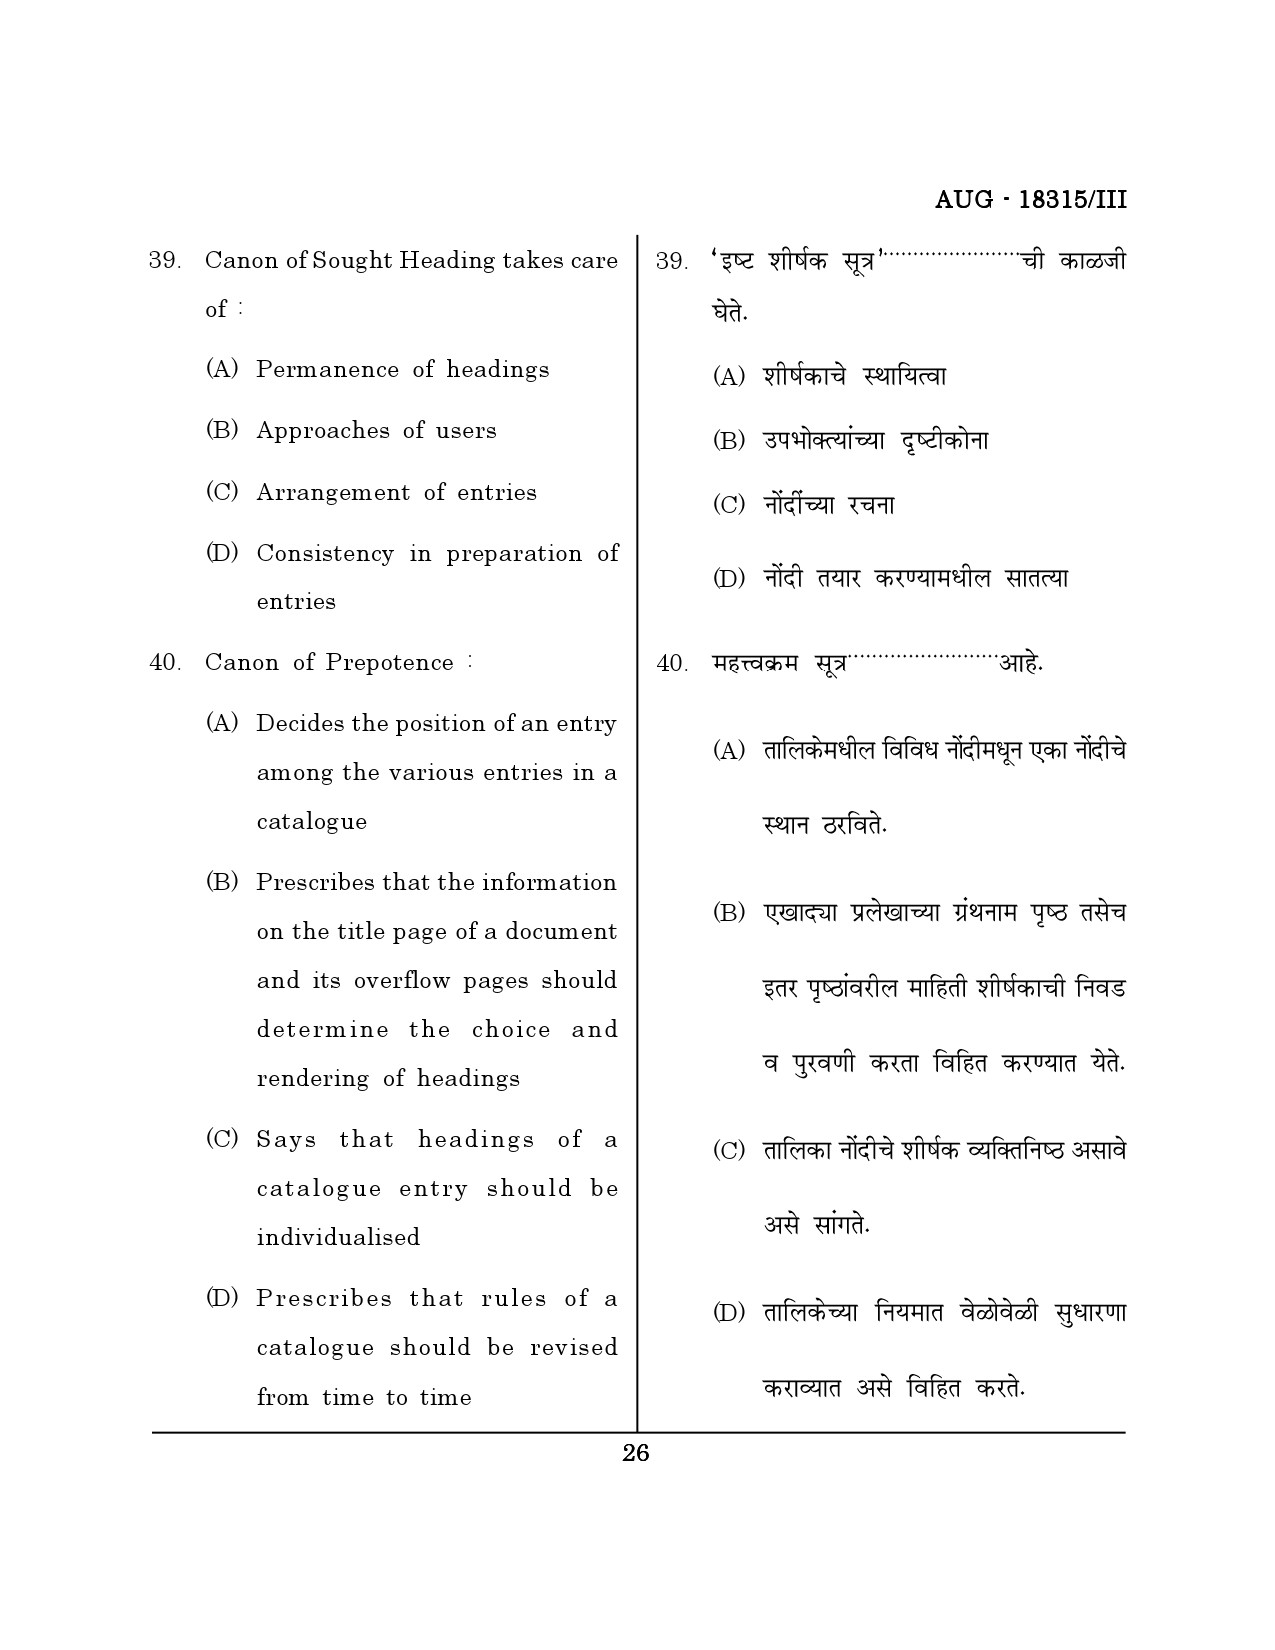 Maharashtra SET Library Information Science Question Paper III August 2015 25